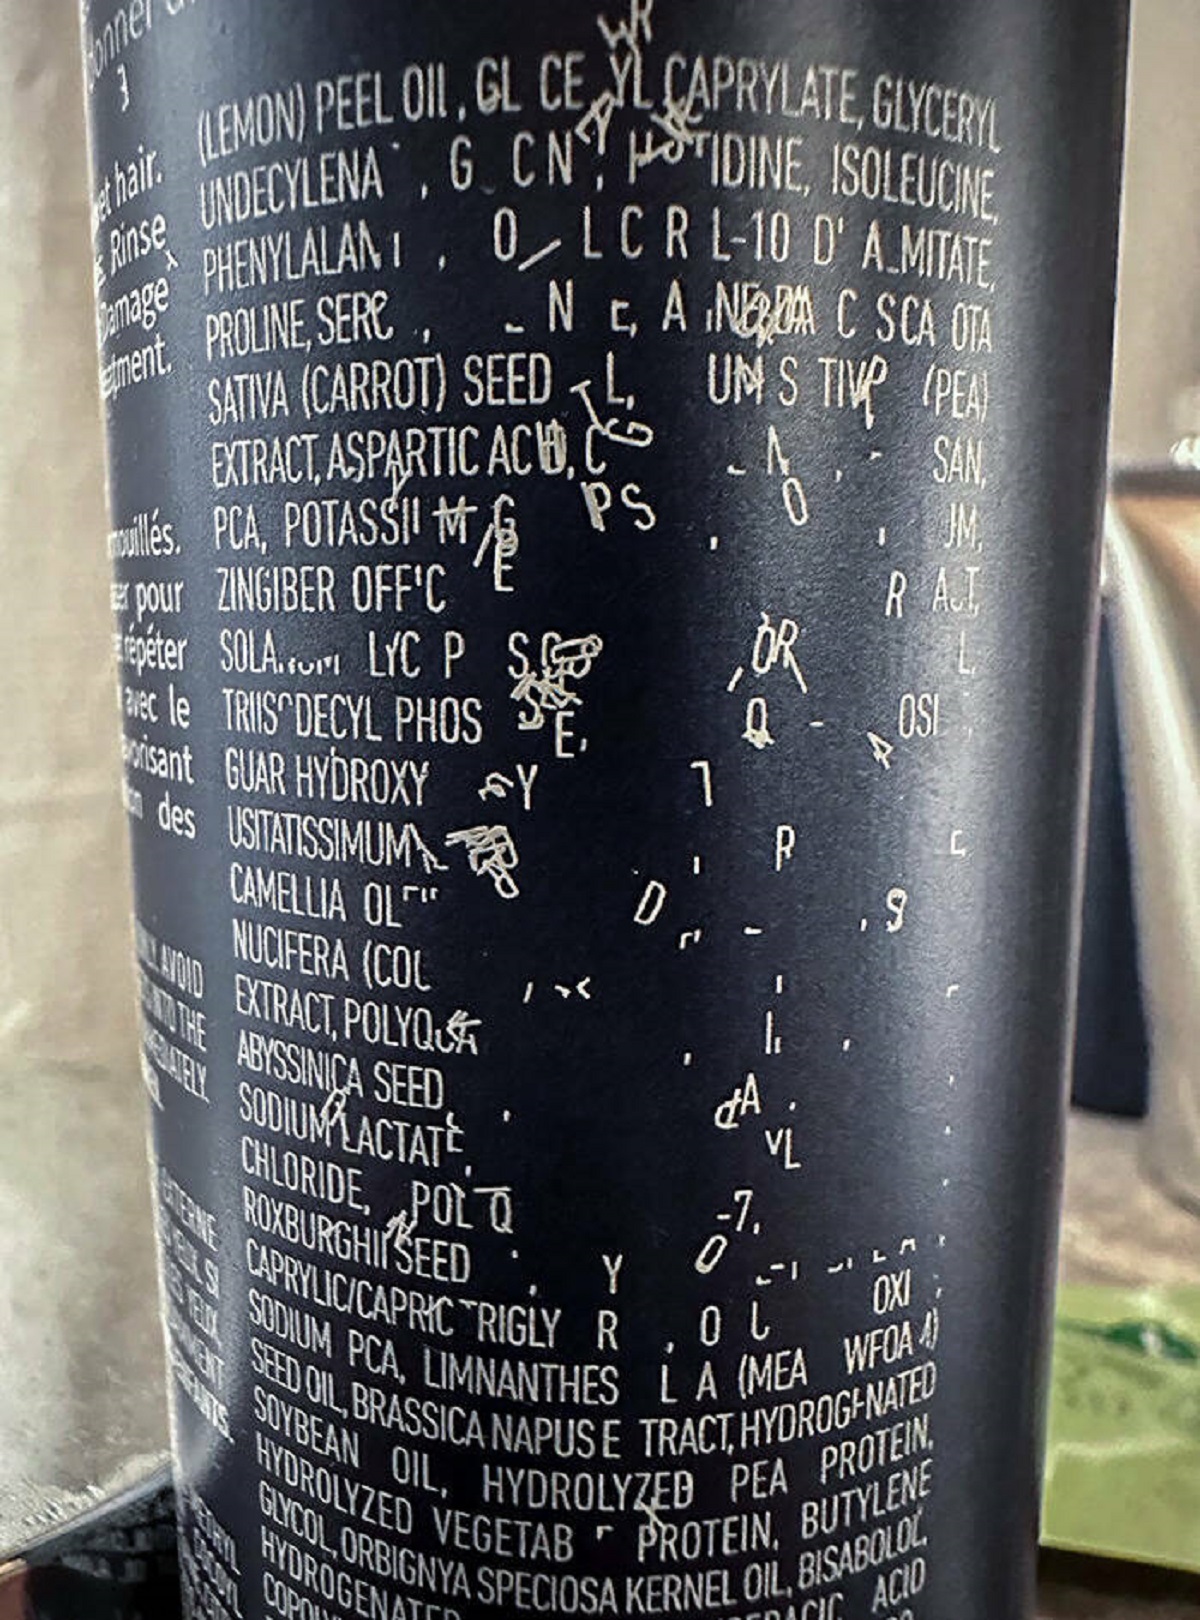 "The Way The Sticker On This Shampoo Bottle Has Worn Looks Like A Letter Tornado"